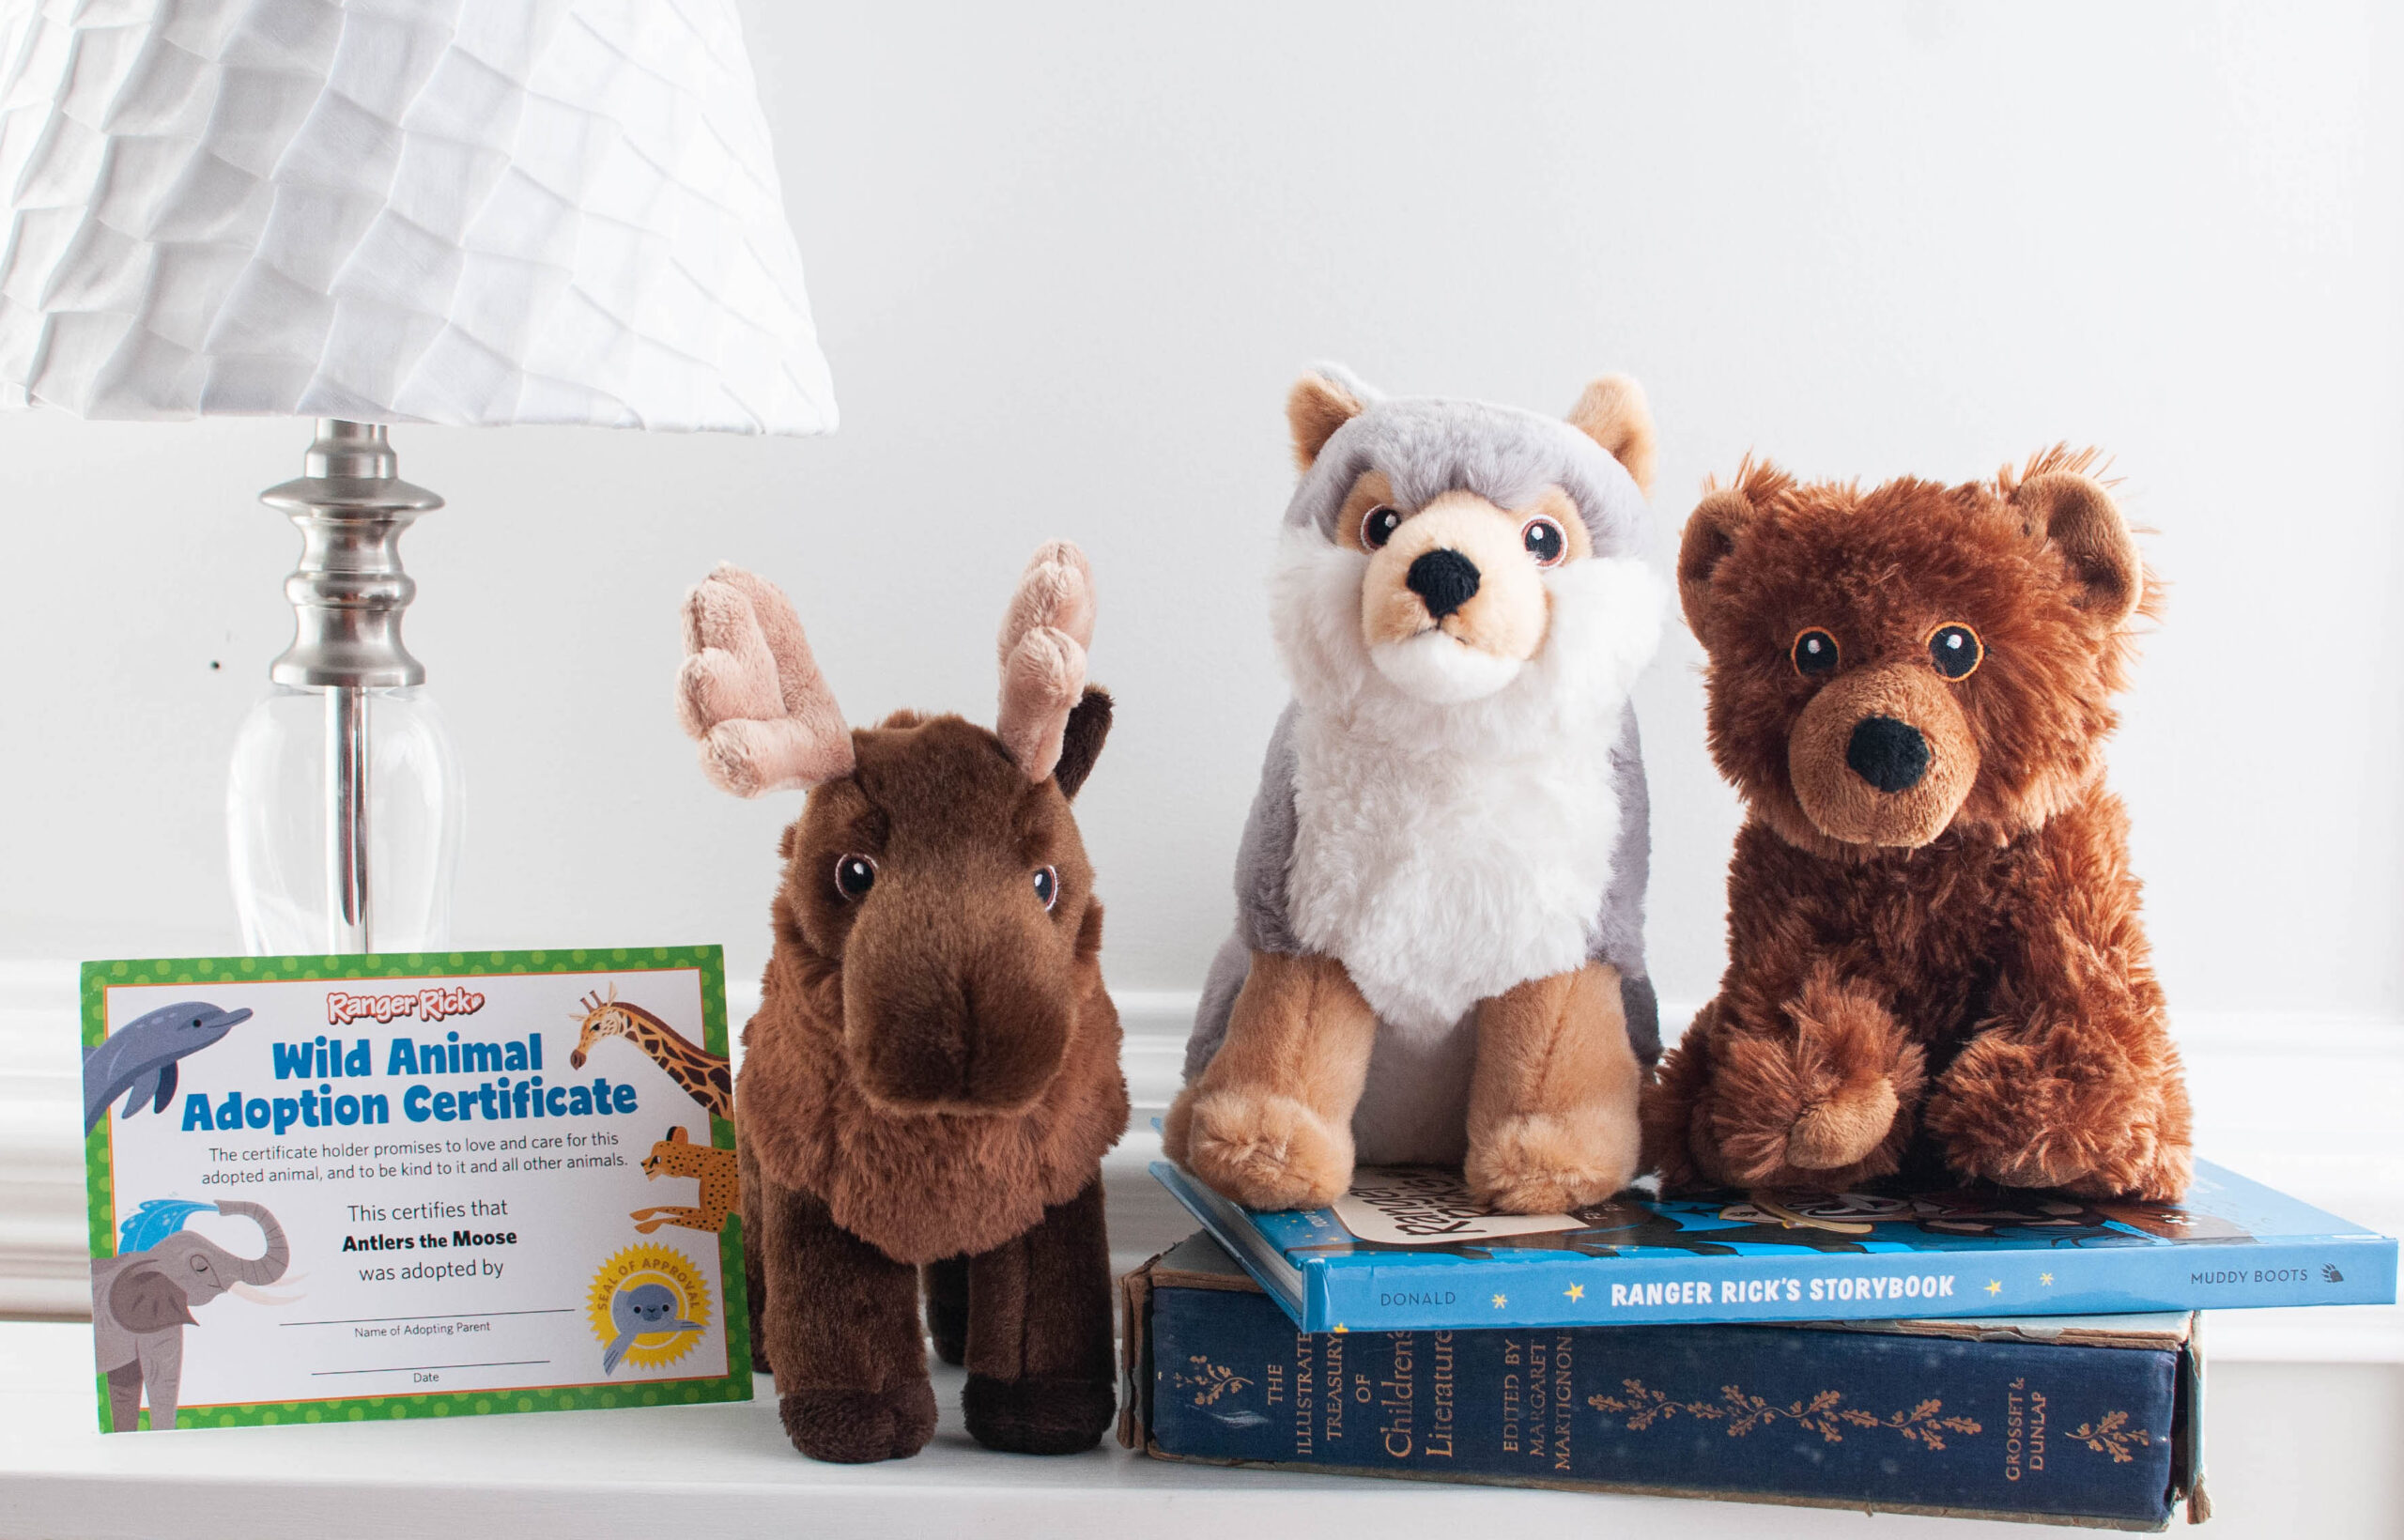 Stuffed animals of a wolf, bear, and moose on a bookcase, next to a Wild Animal Adoption Certificate.